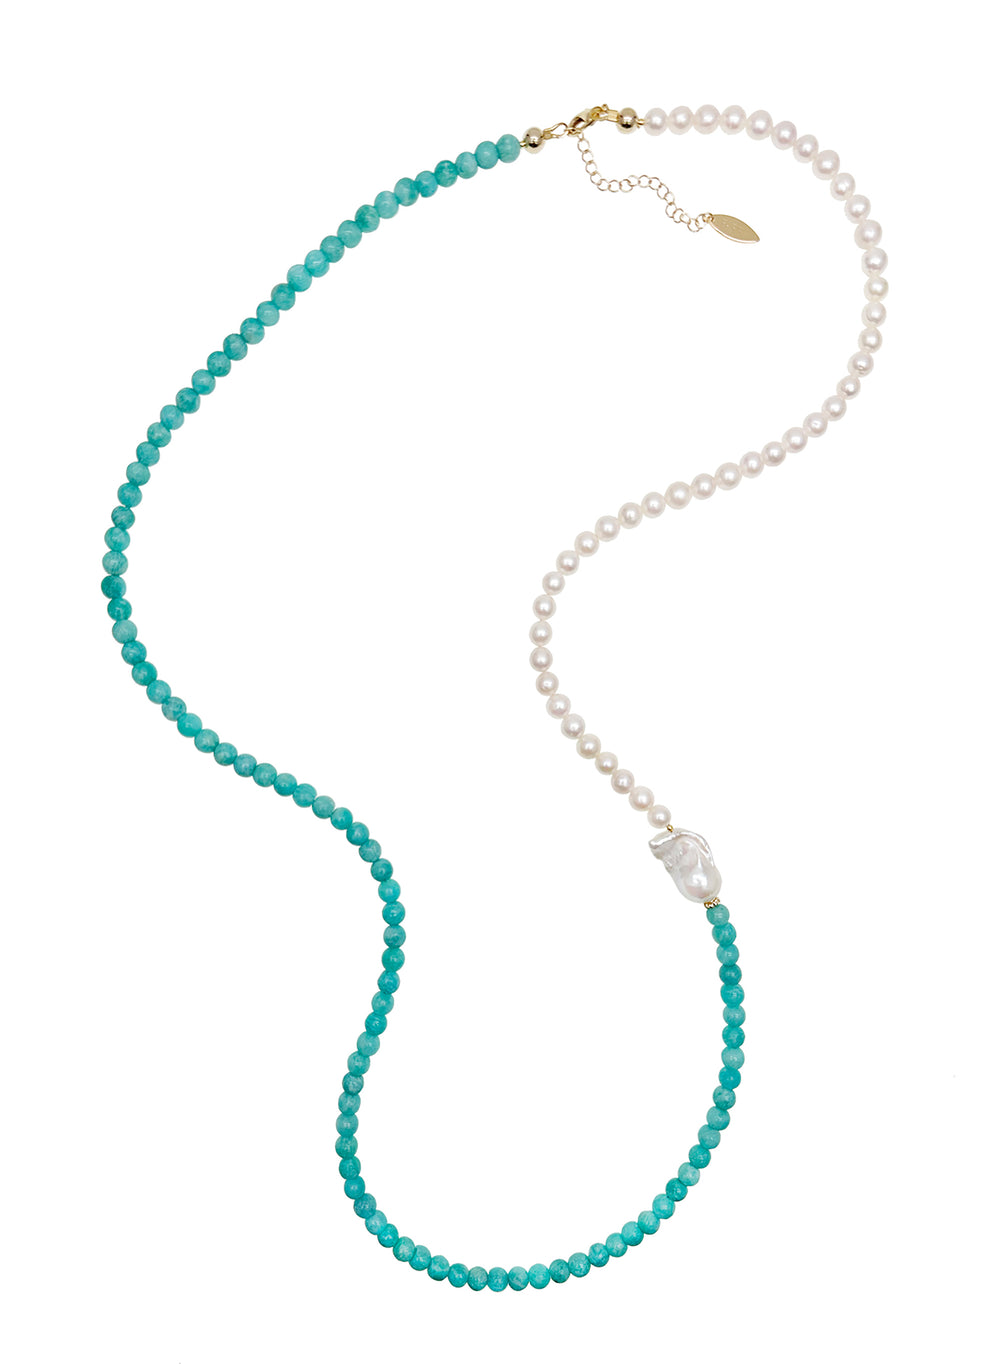 Freshwater Pearls and Amazonite Long Necklace JN058 - FARRA